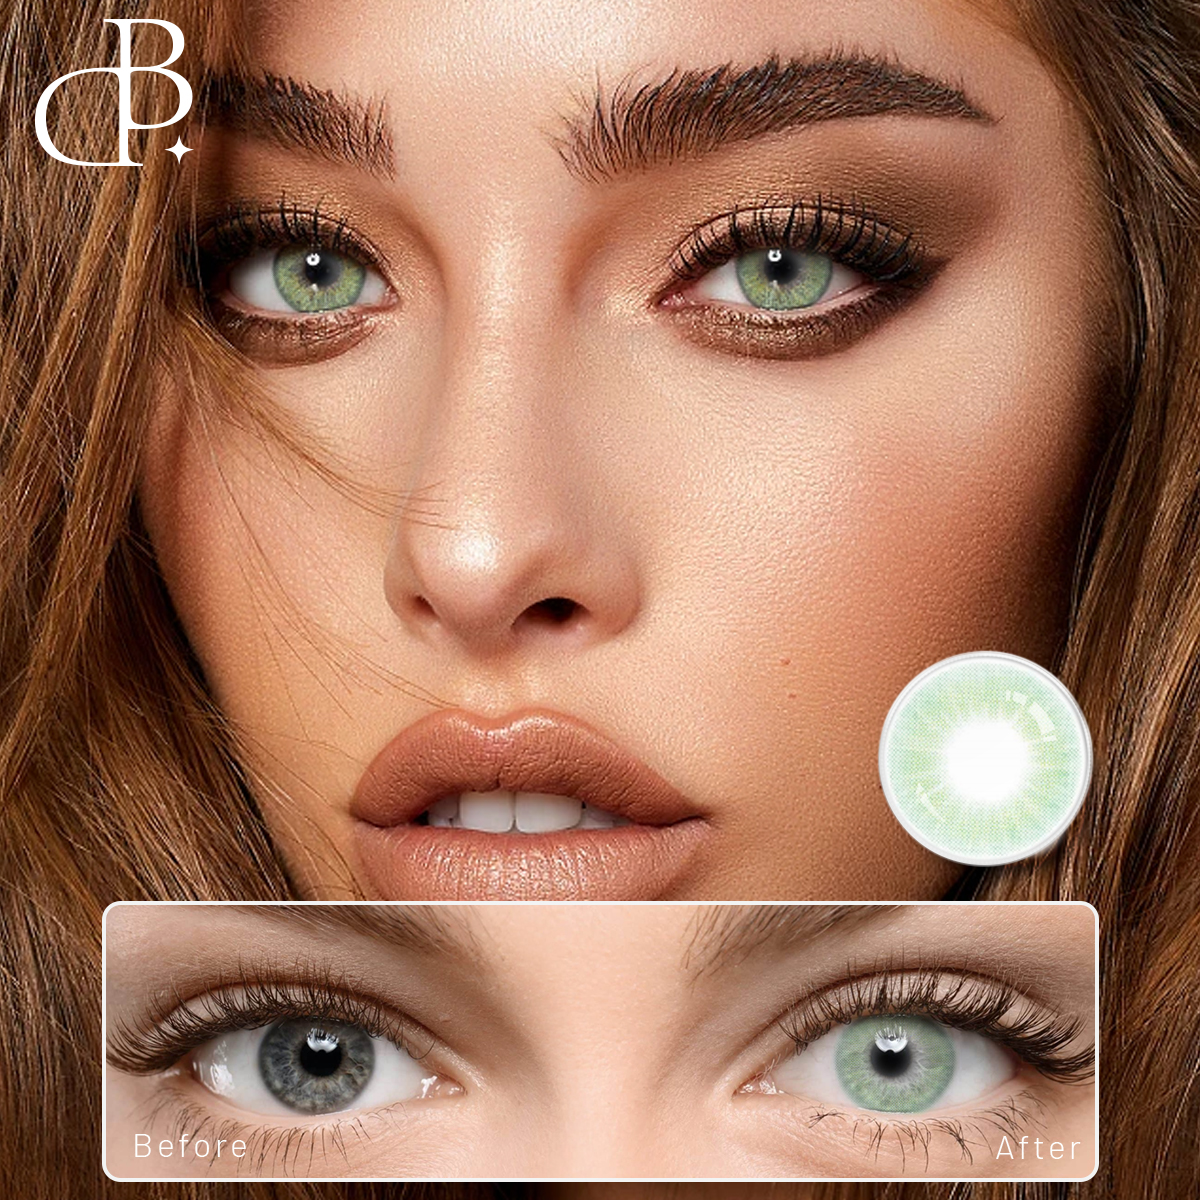 COLORS Classical Models colored lens Custom brand contact lens sells well lens Rapid delivery